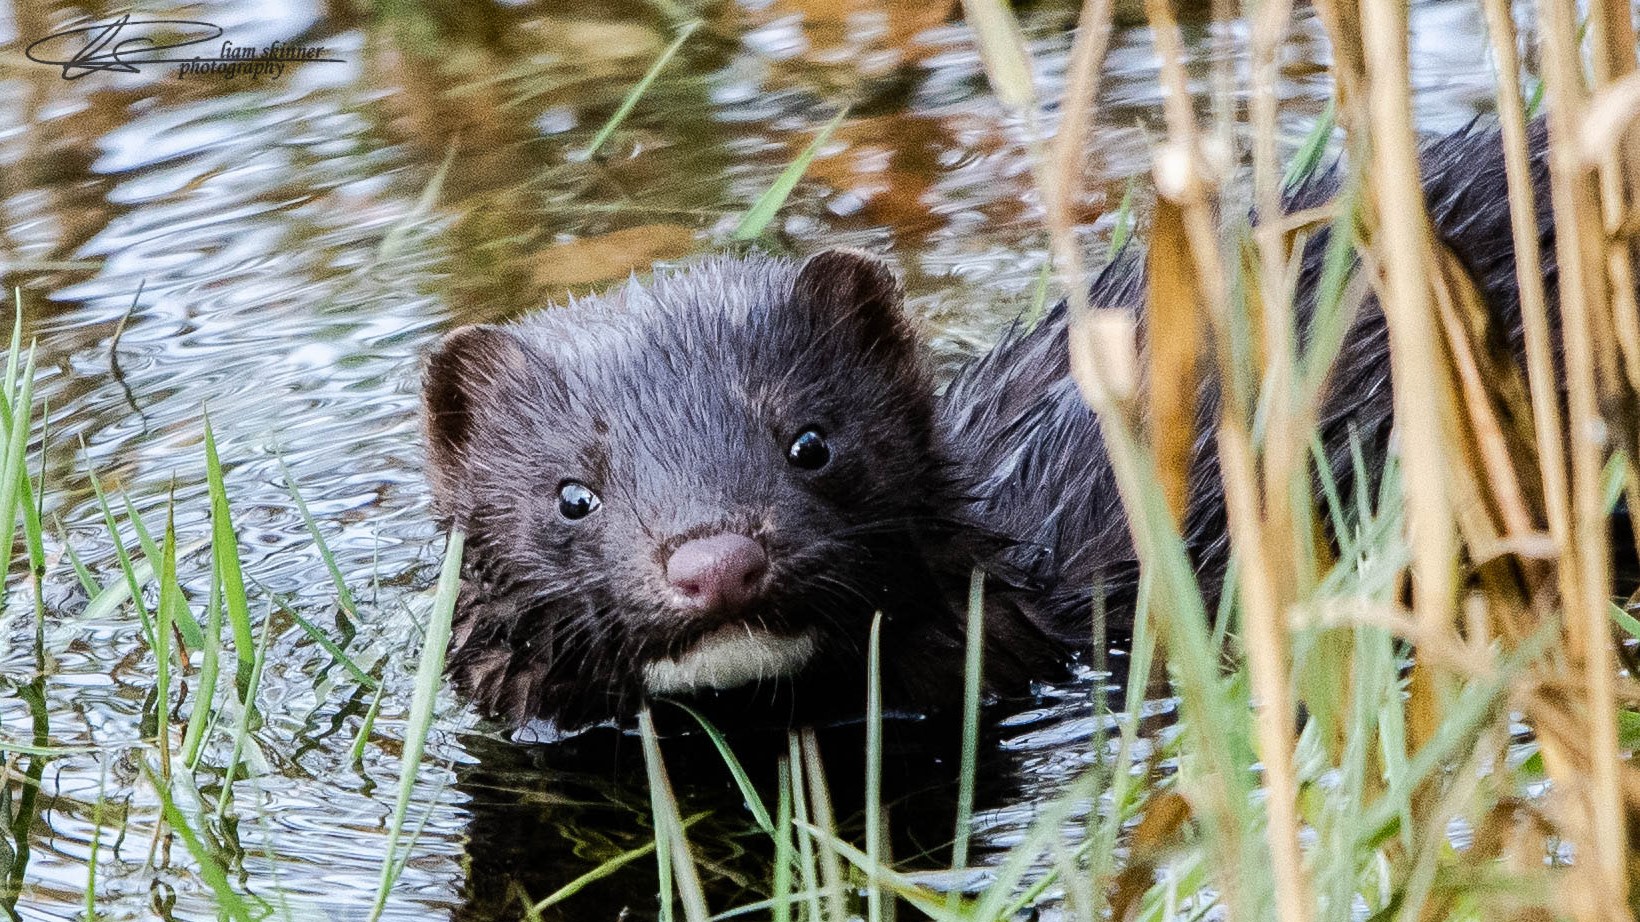 Close up of American mink in water - credit Liam Skinner